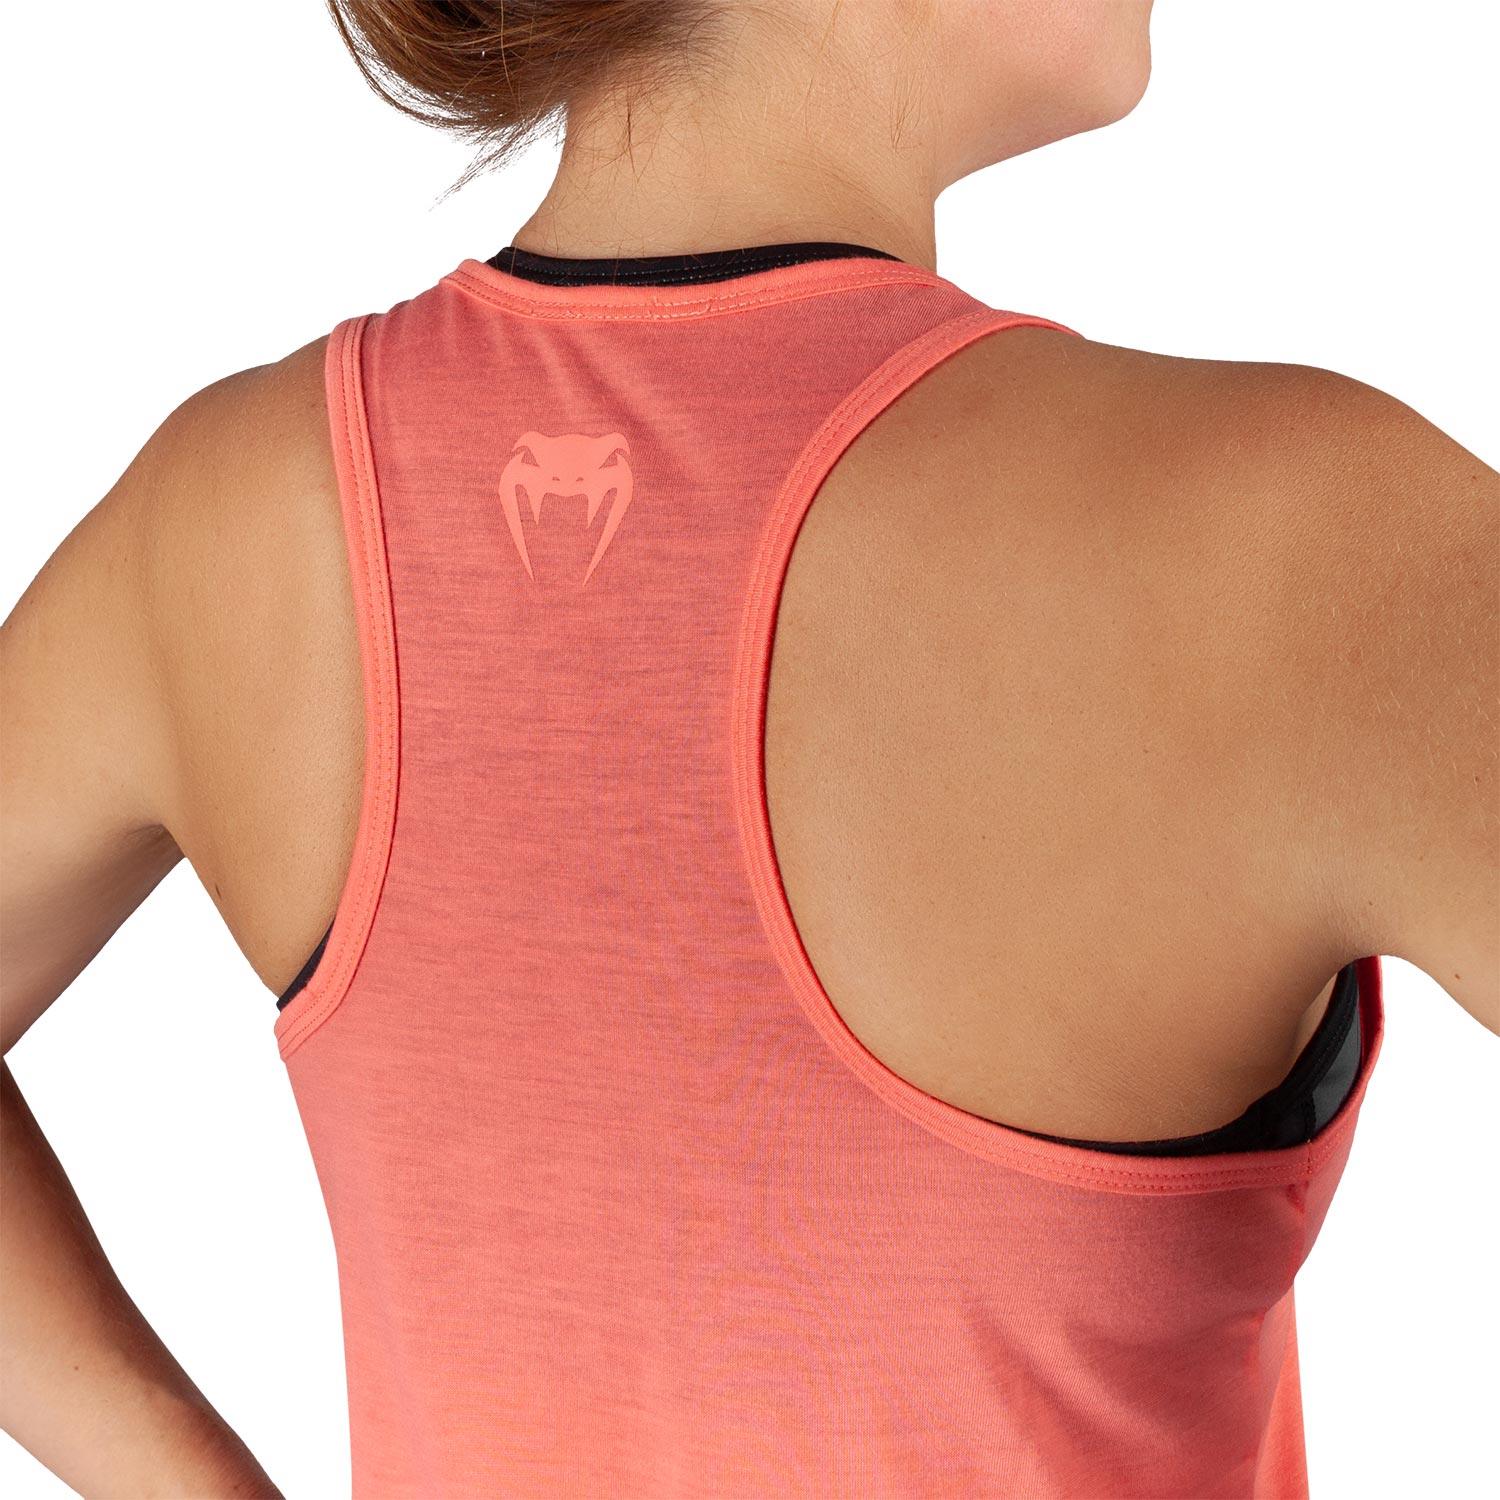 Venum Classic Tank Top - For Women - Pink Picture 4